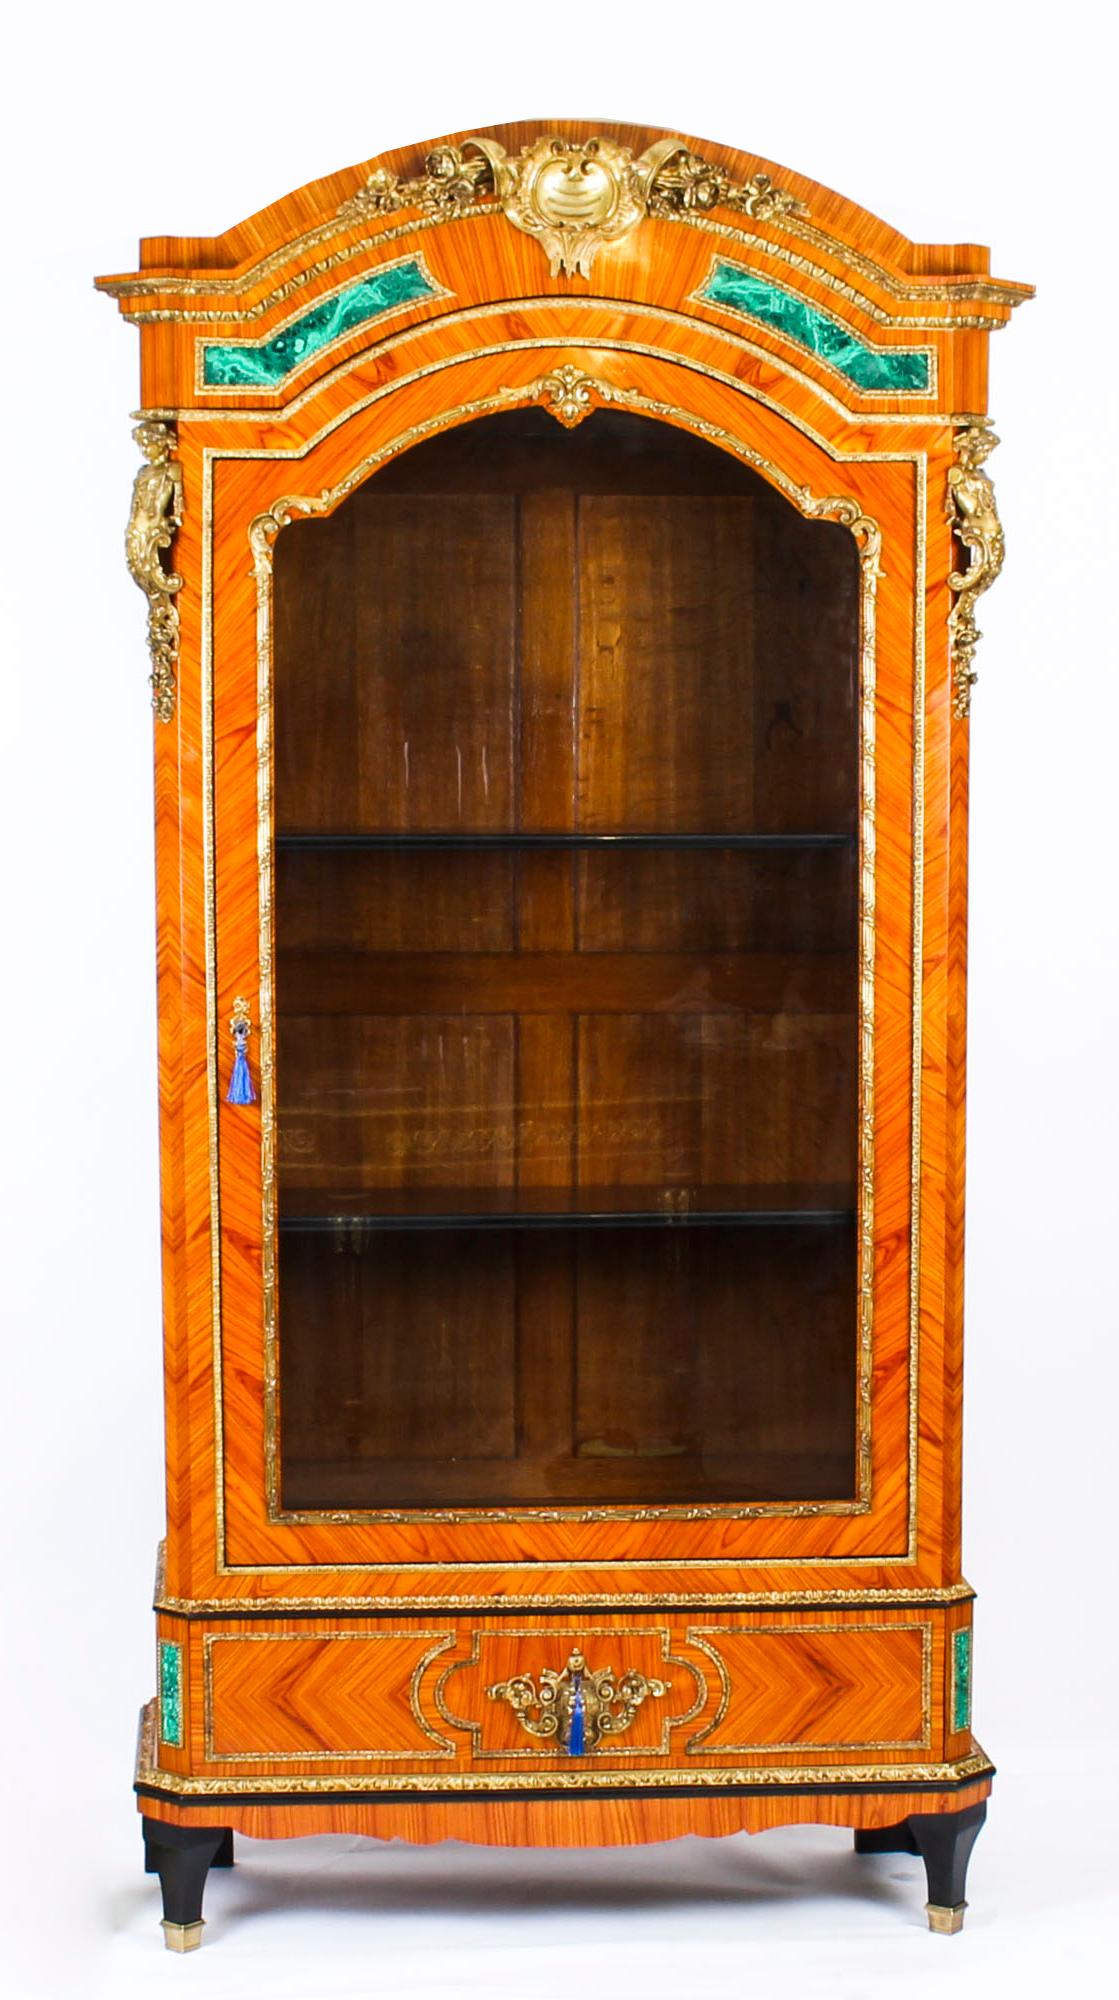 This is a beautiful antique French Malachite and Ormolu mounted vitrine in the French Louis XV manner, circa 1870 in date.

This beautiful cabinet has an abundance of exquisite decorative ormolu mounts inset with malachite. The domed cornice above a